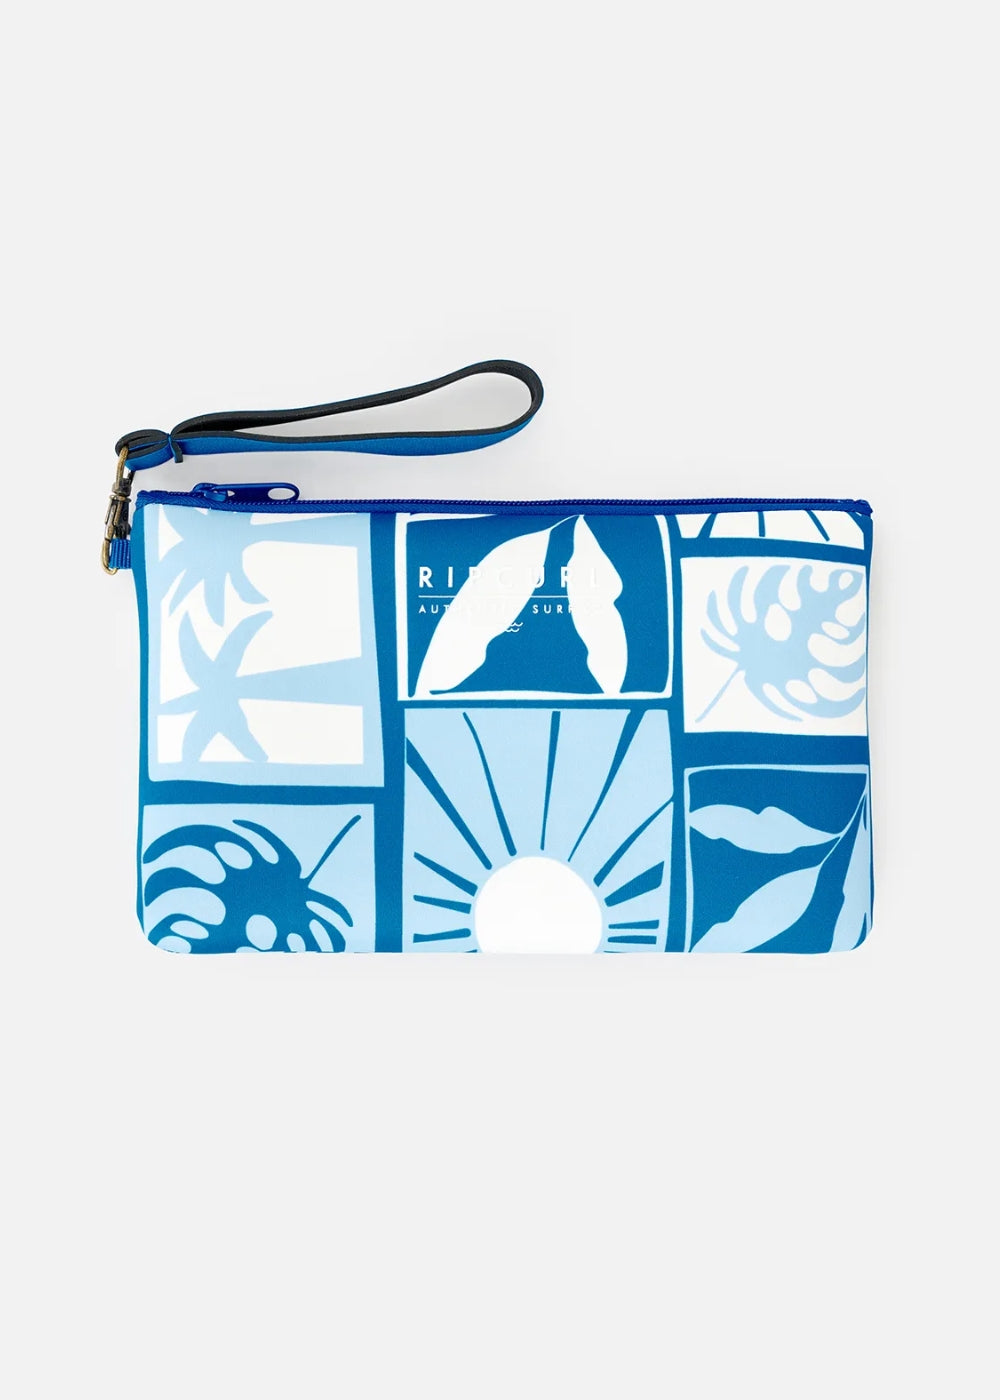 Santorini Neo Pouch by Rip Curl